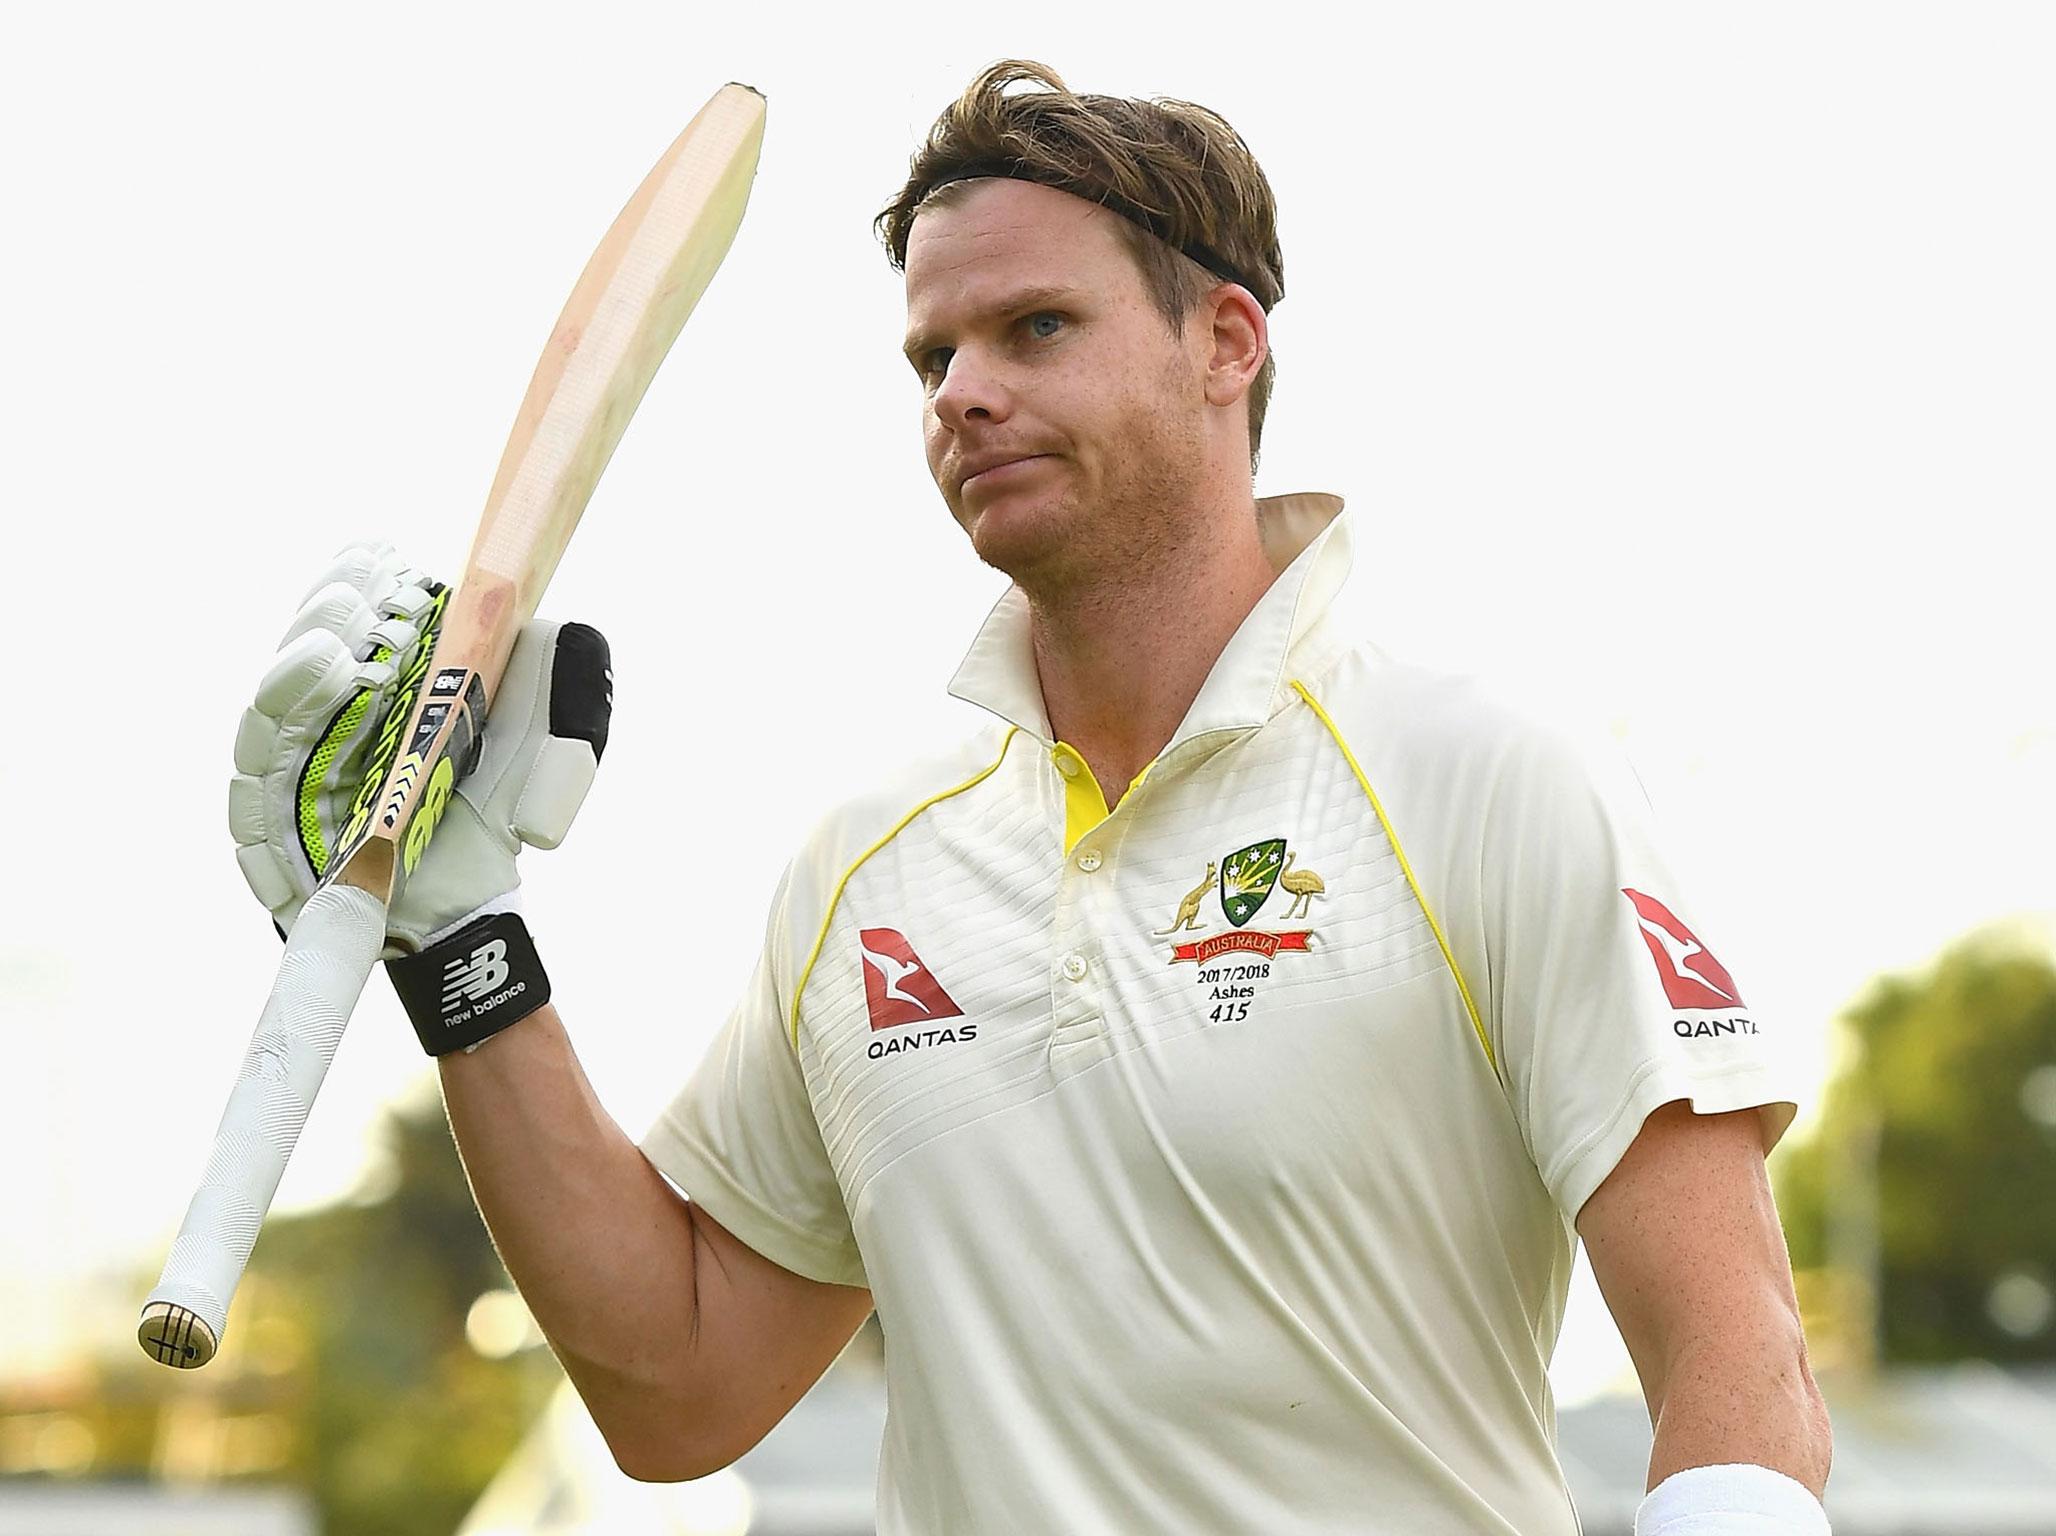 Steve Smith was at his effortless best as he led Australia's fightback in Perth